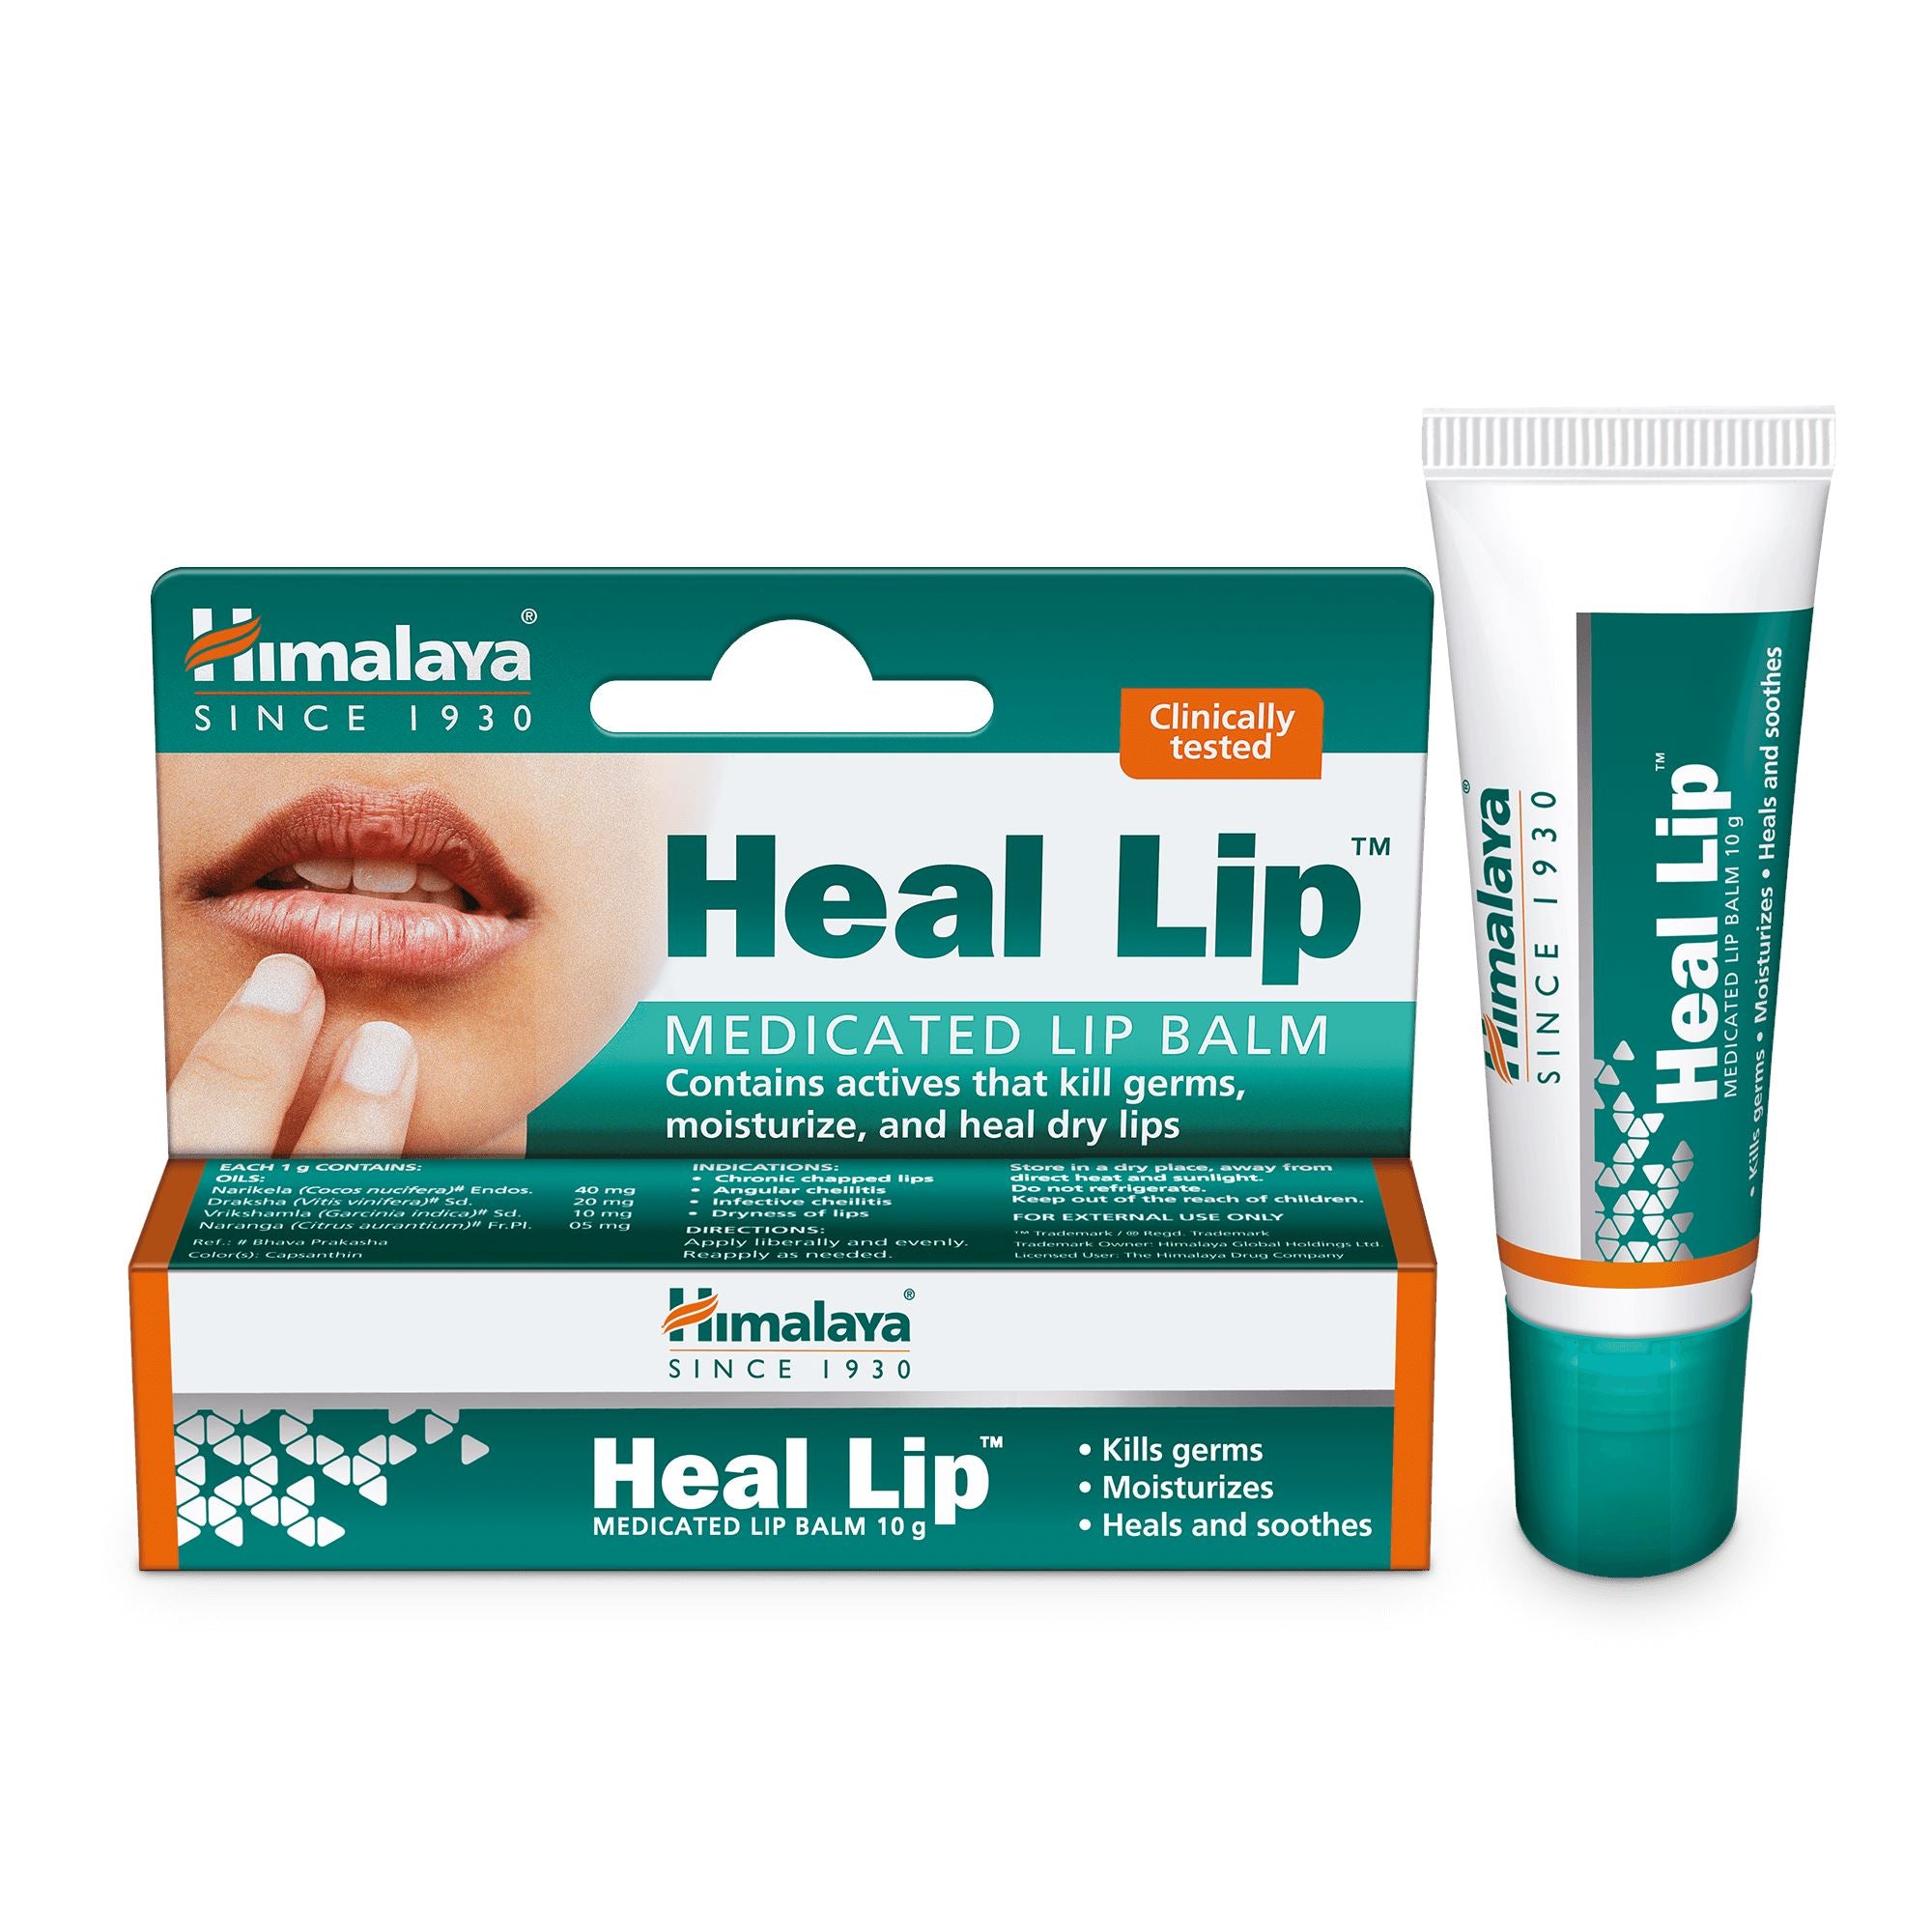 Himalaya Heal Lip 10g - Medicated Lip Balm For Chapped and Cracked Lips